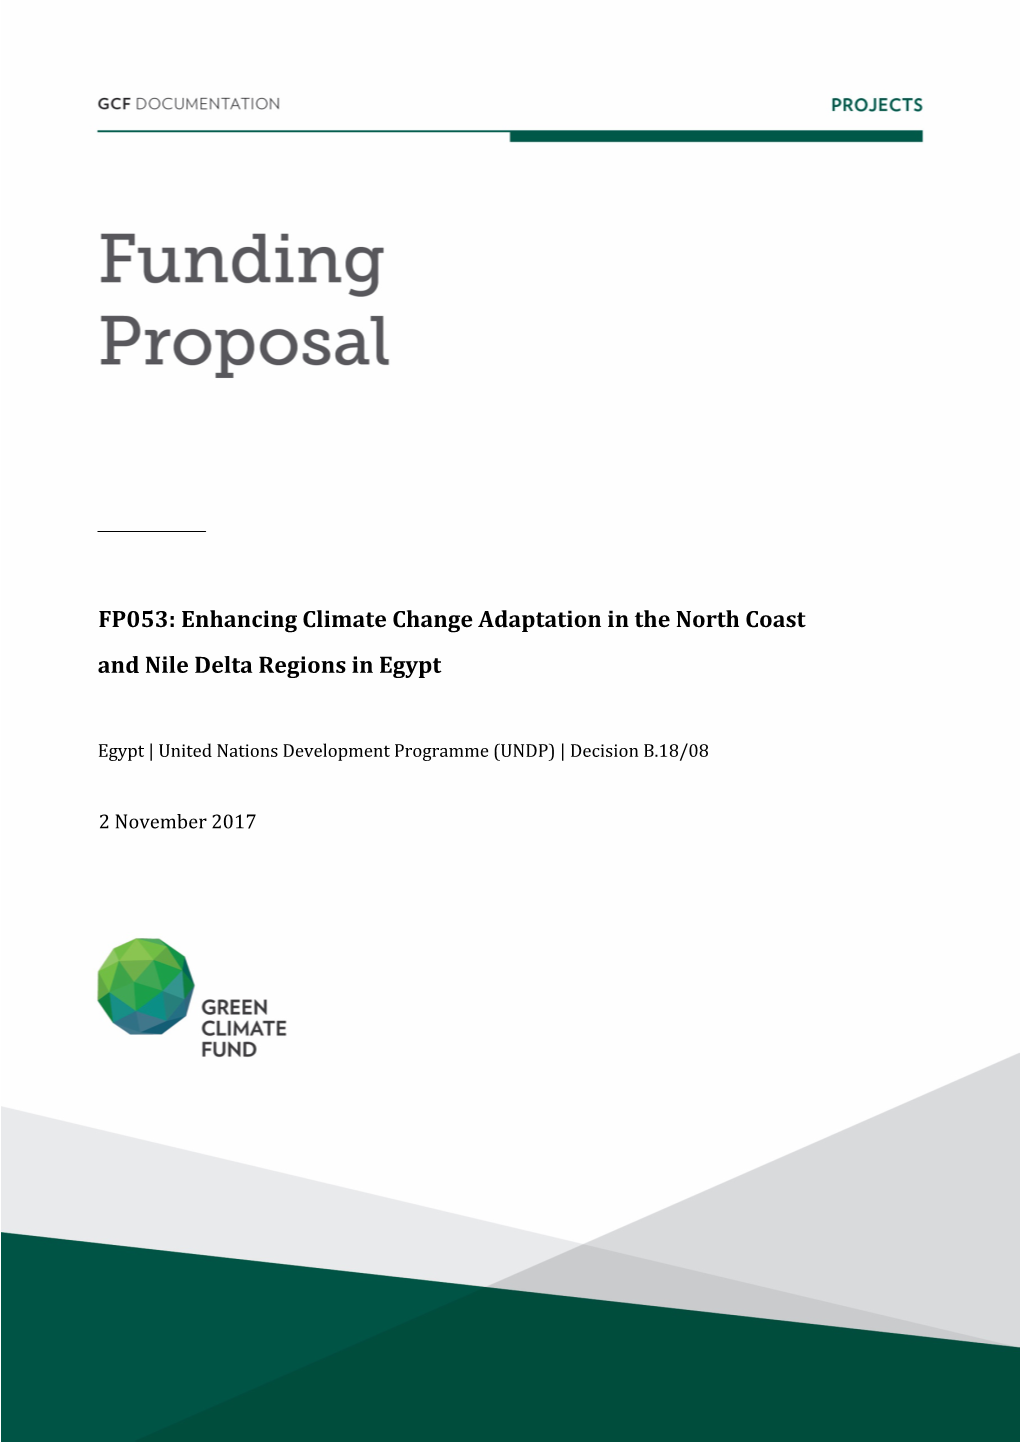 FP053: Enhancing Climate Change Adaptation in the North Coast and Nile Delta Regions in Egypt